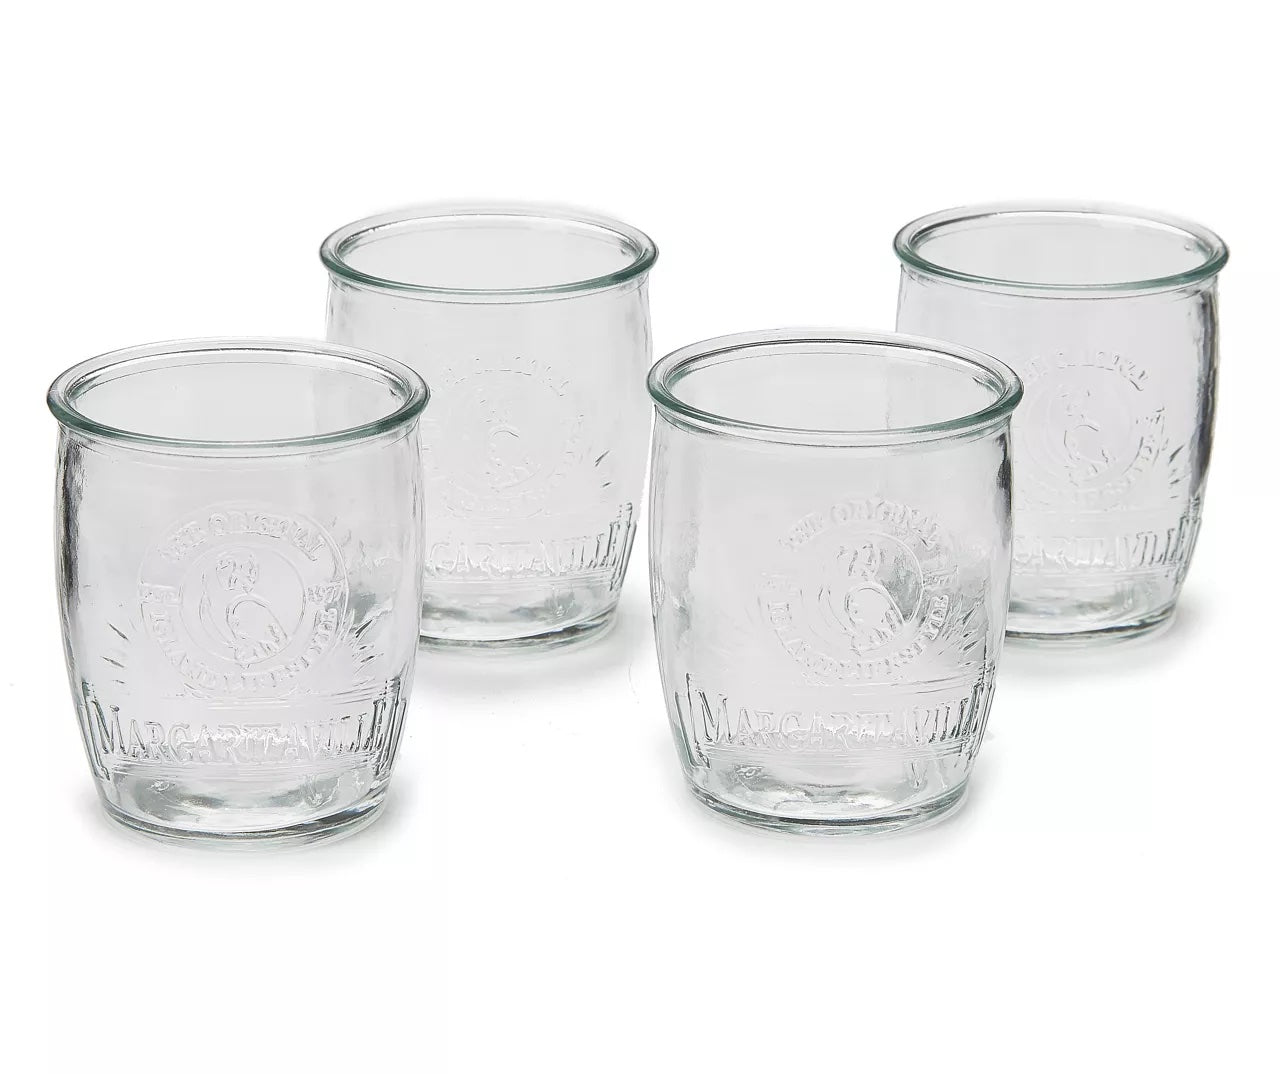 Margaritaville Island Double Old Fashioned Glass Set, Set of 4 (NEW)